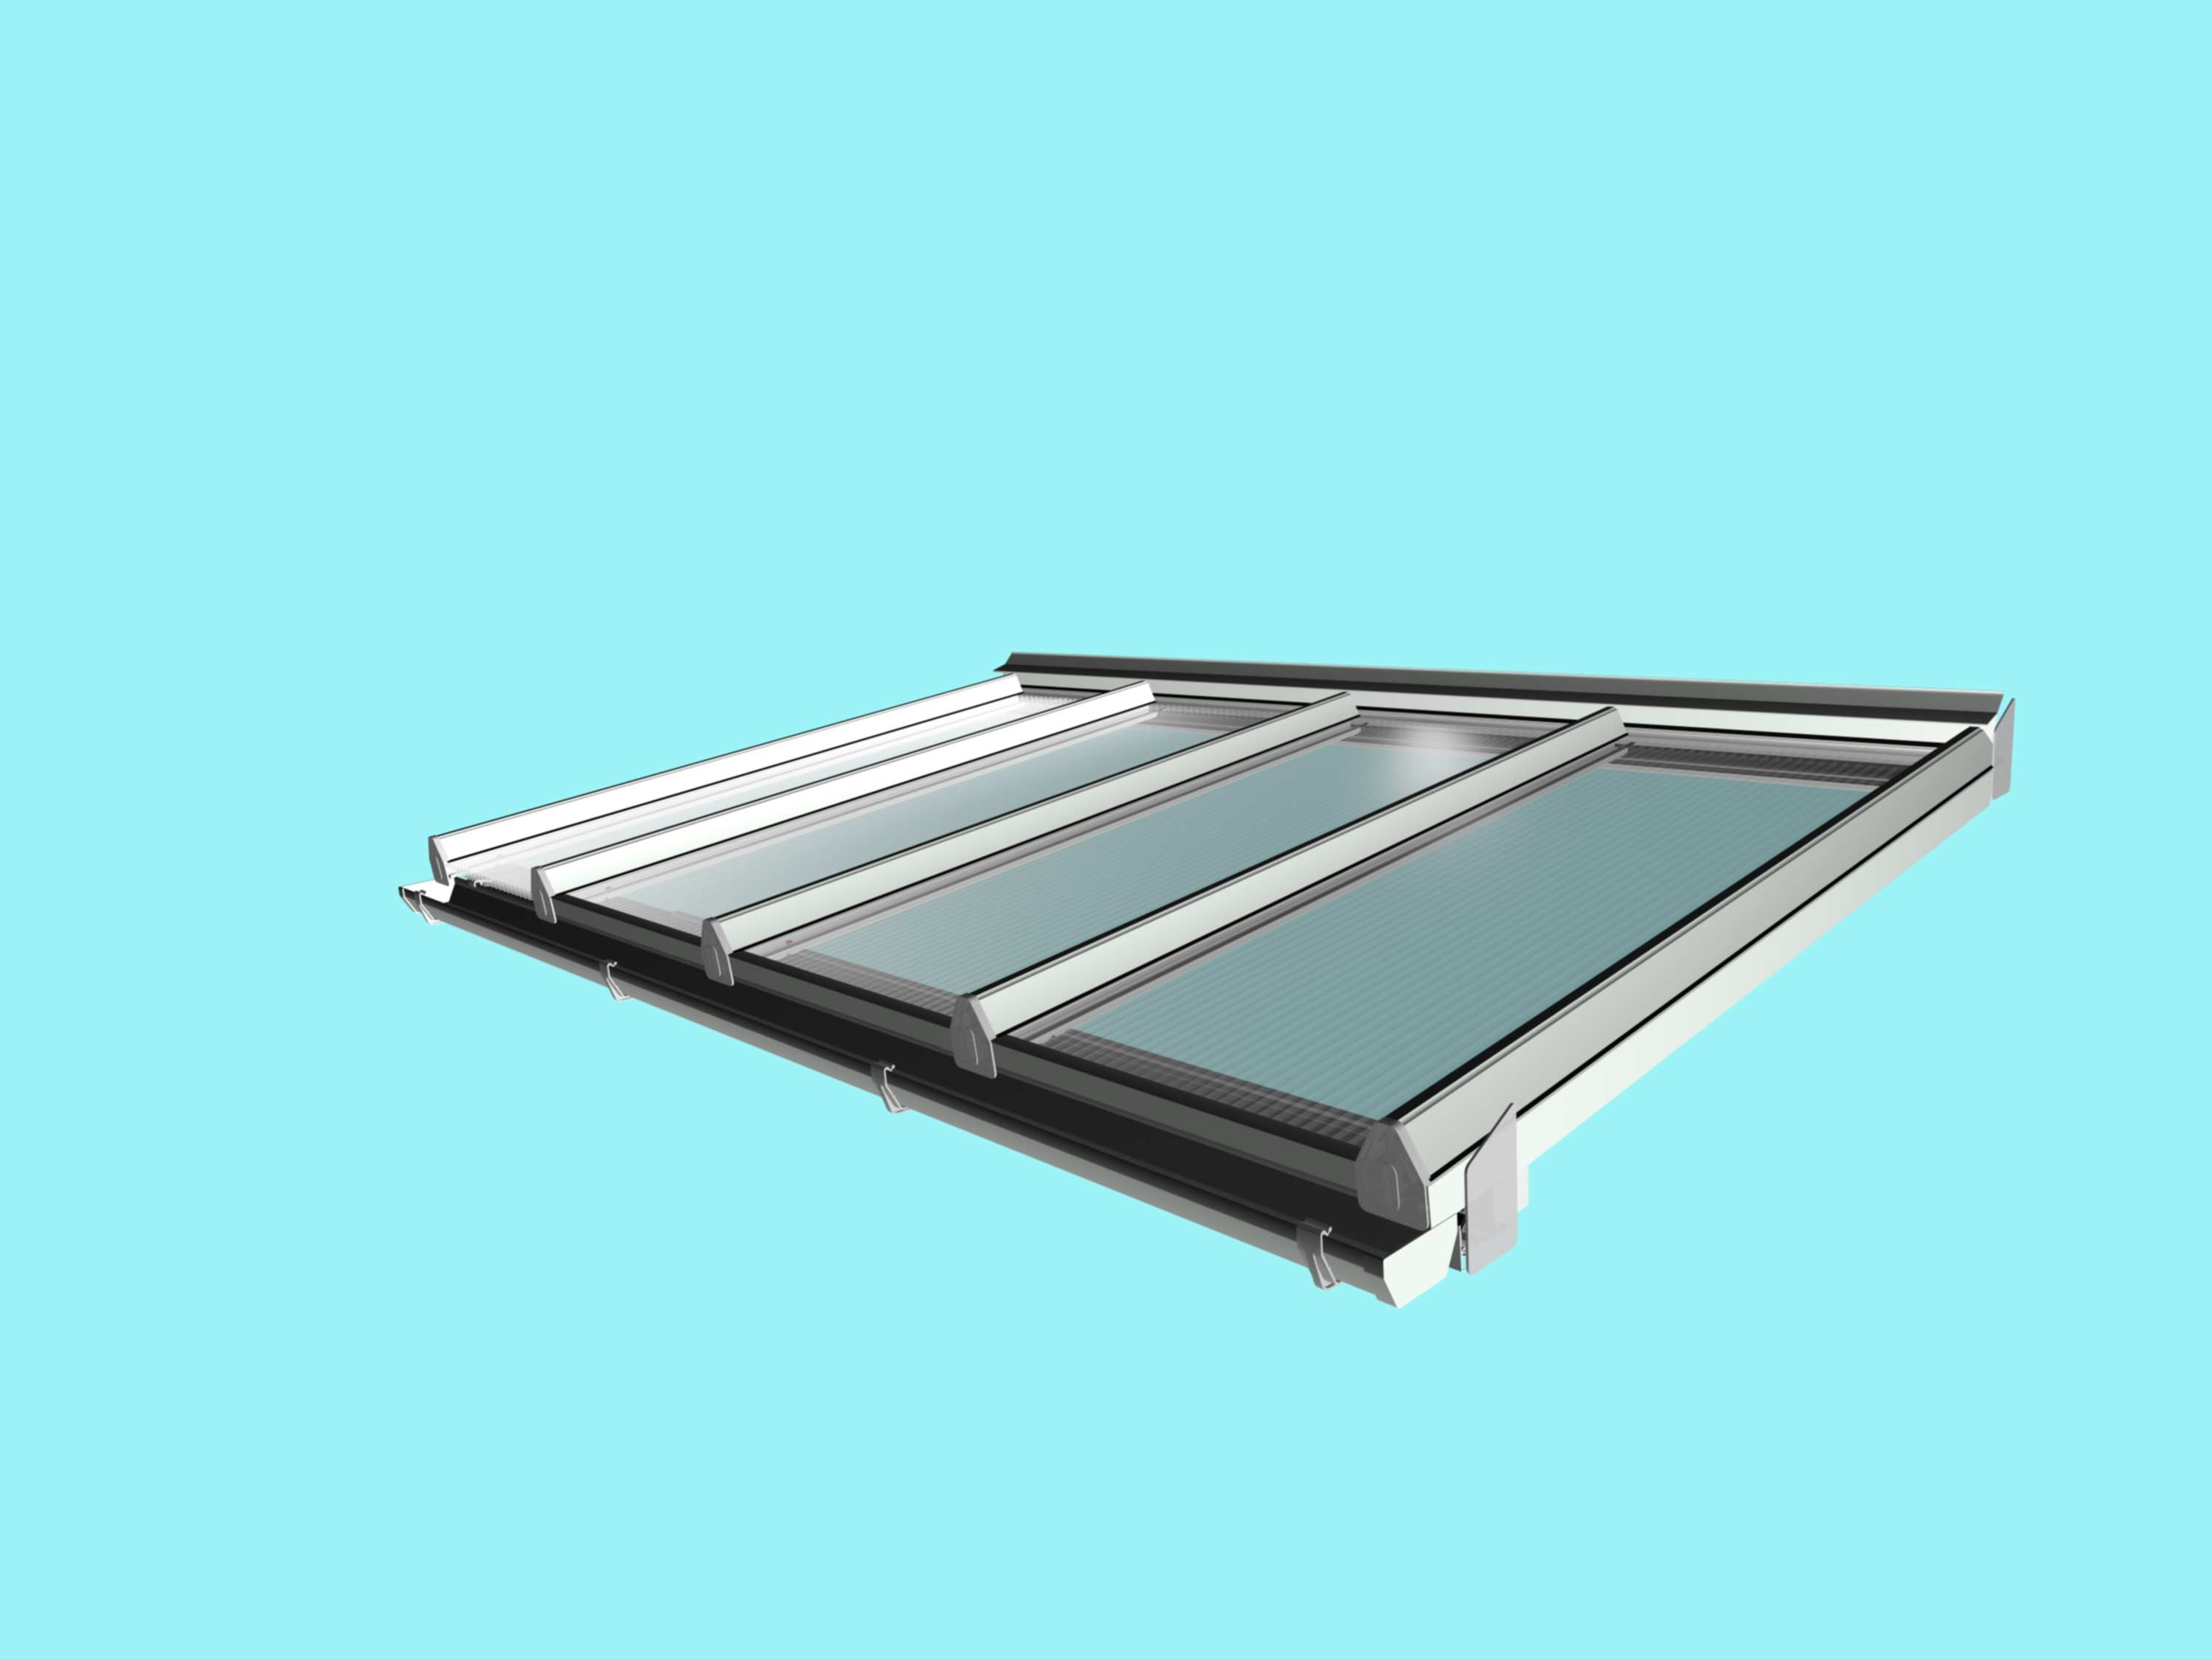 Self-Supporting DIY Conservatory Roof Kit for 16mm polycarbonate, 4.0m wide x 3.5m Projection from Omega Build